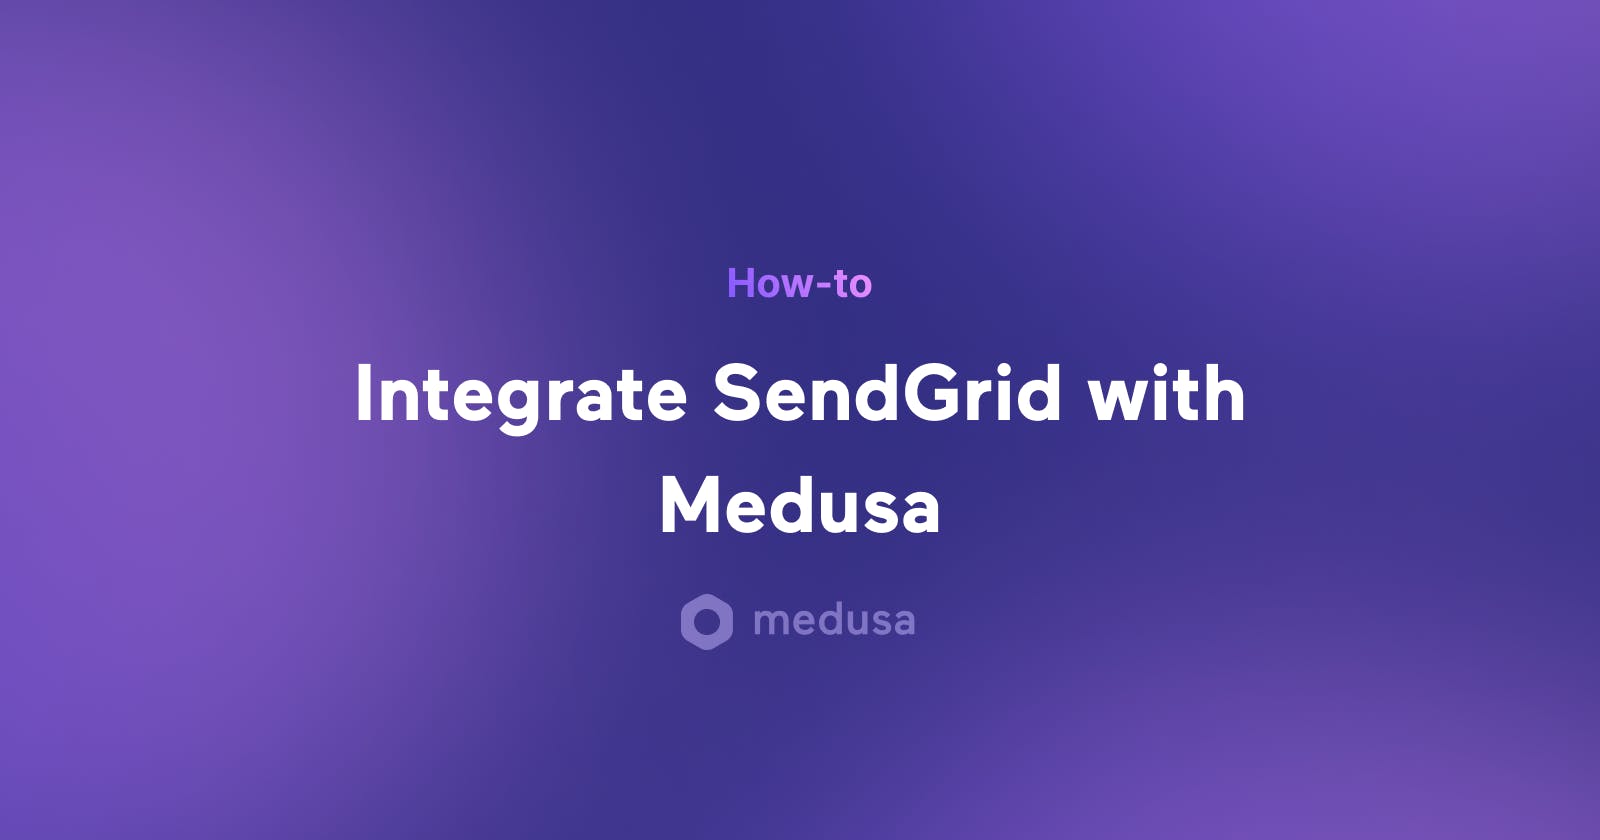 How to Automate Email Flows for Open Source Ecommerce Using SendGrid